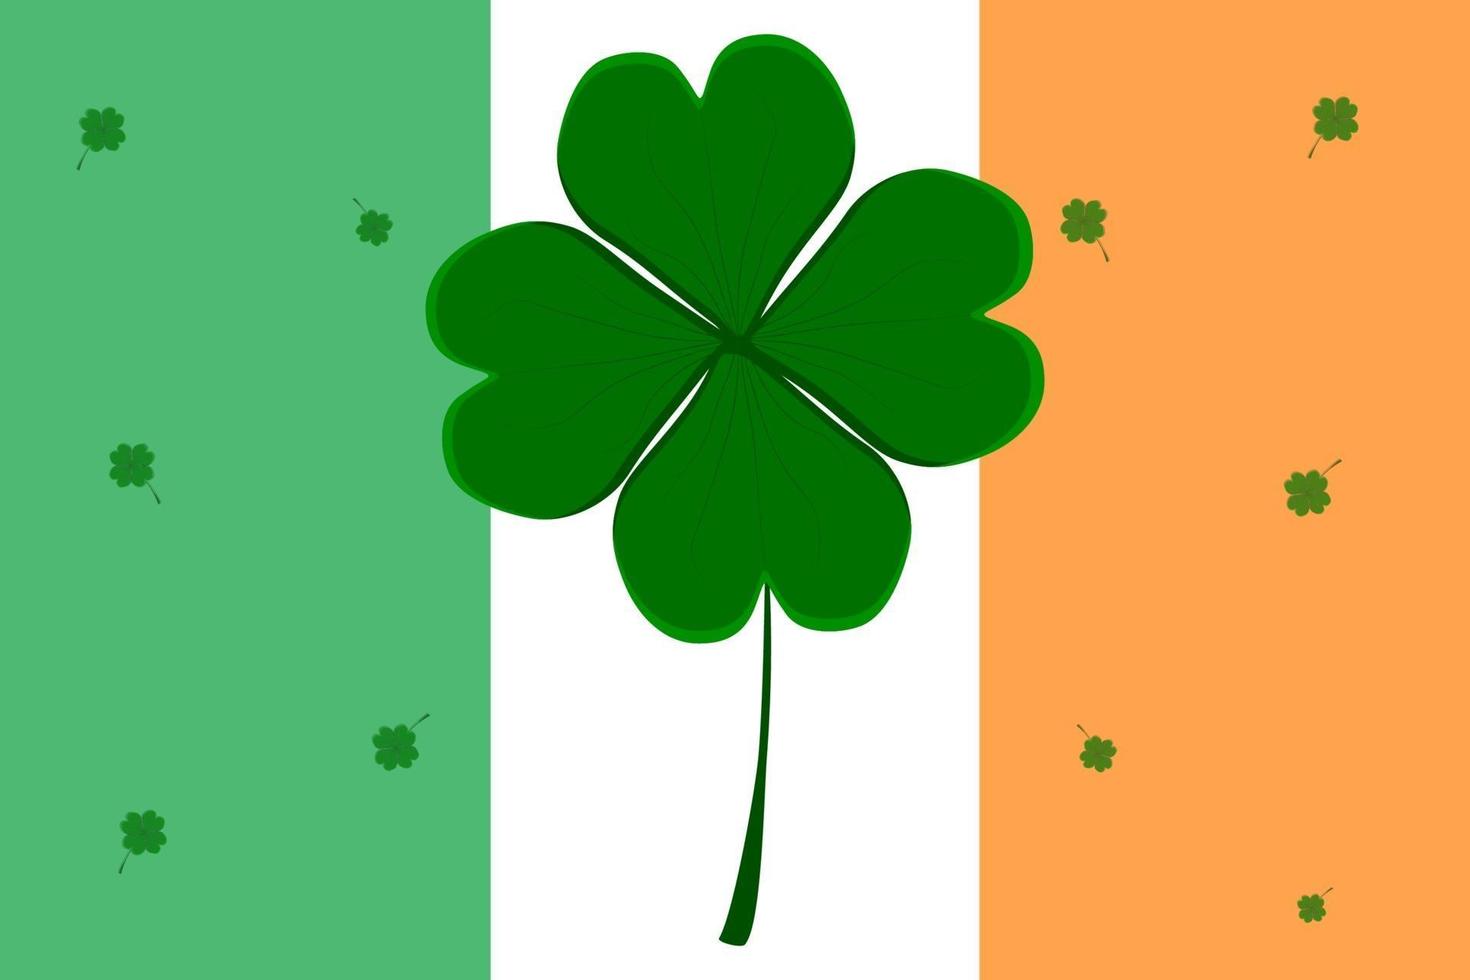 Irish flag on holiday St Patrick day with green shamrock clover vector